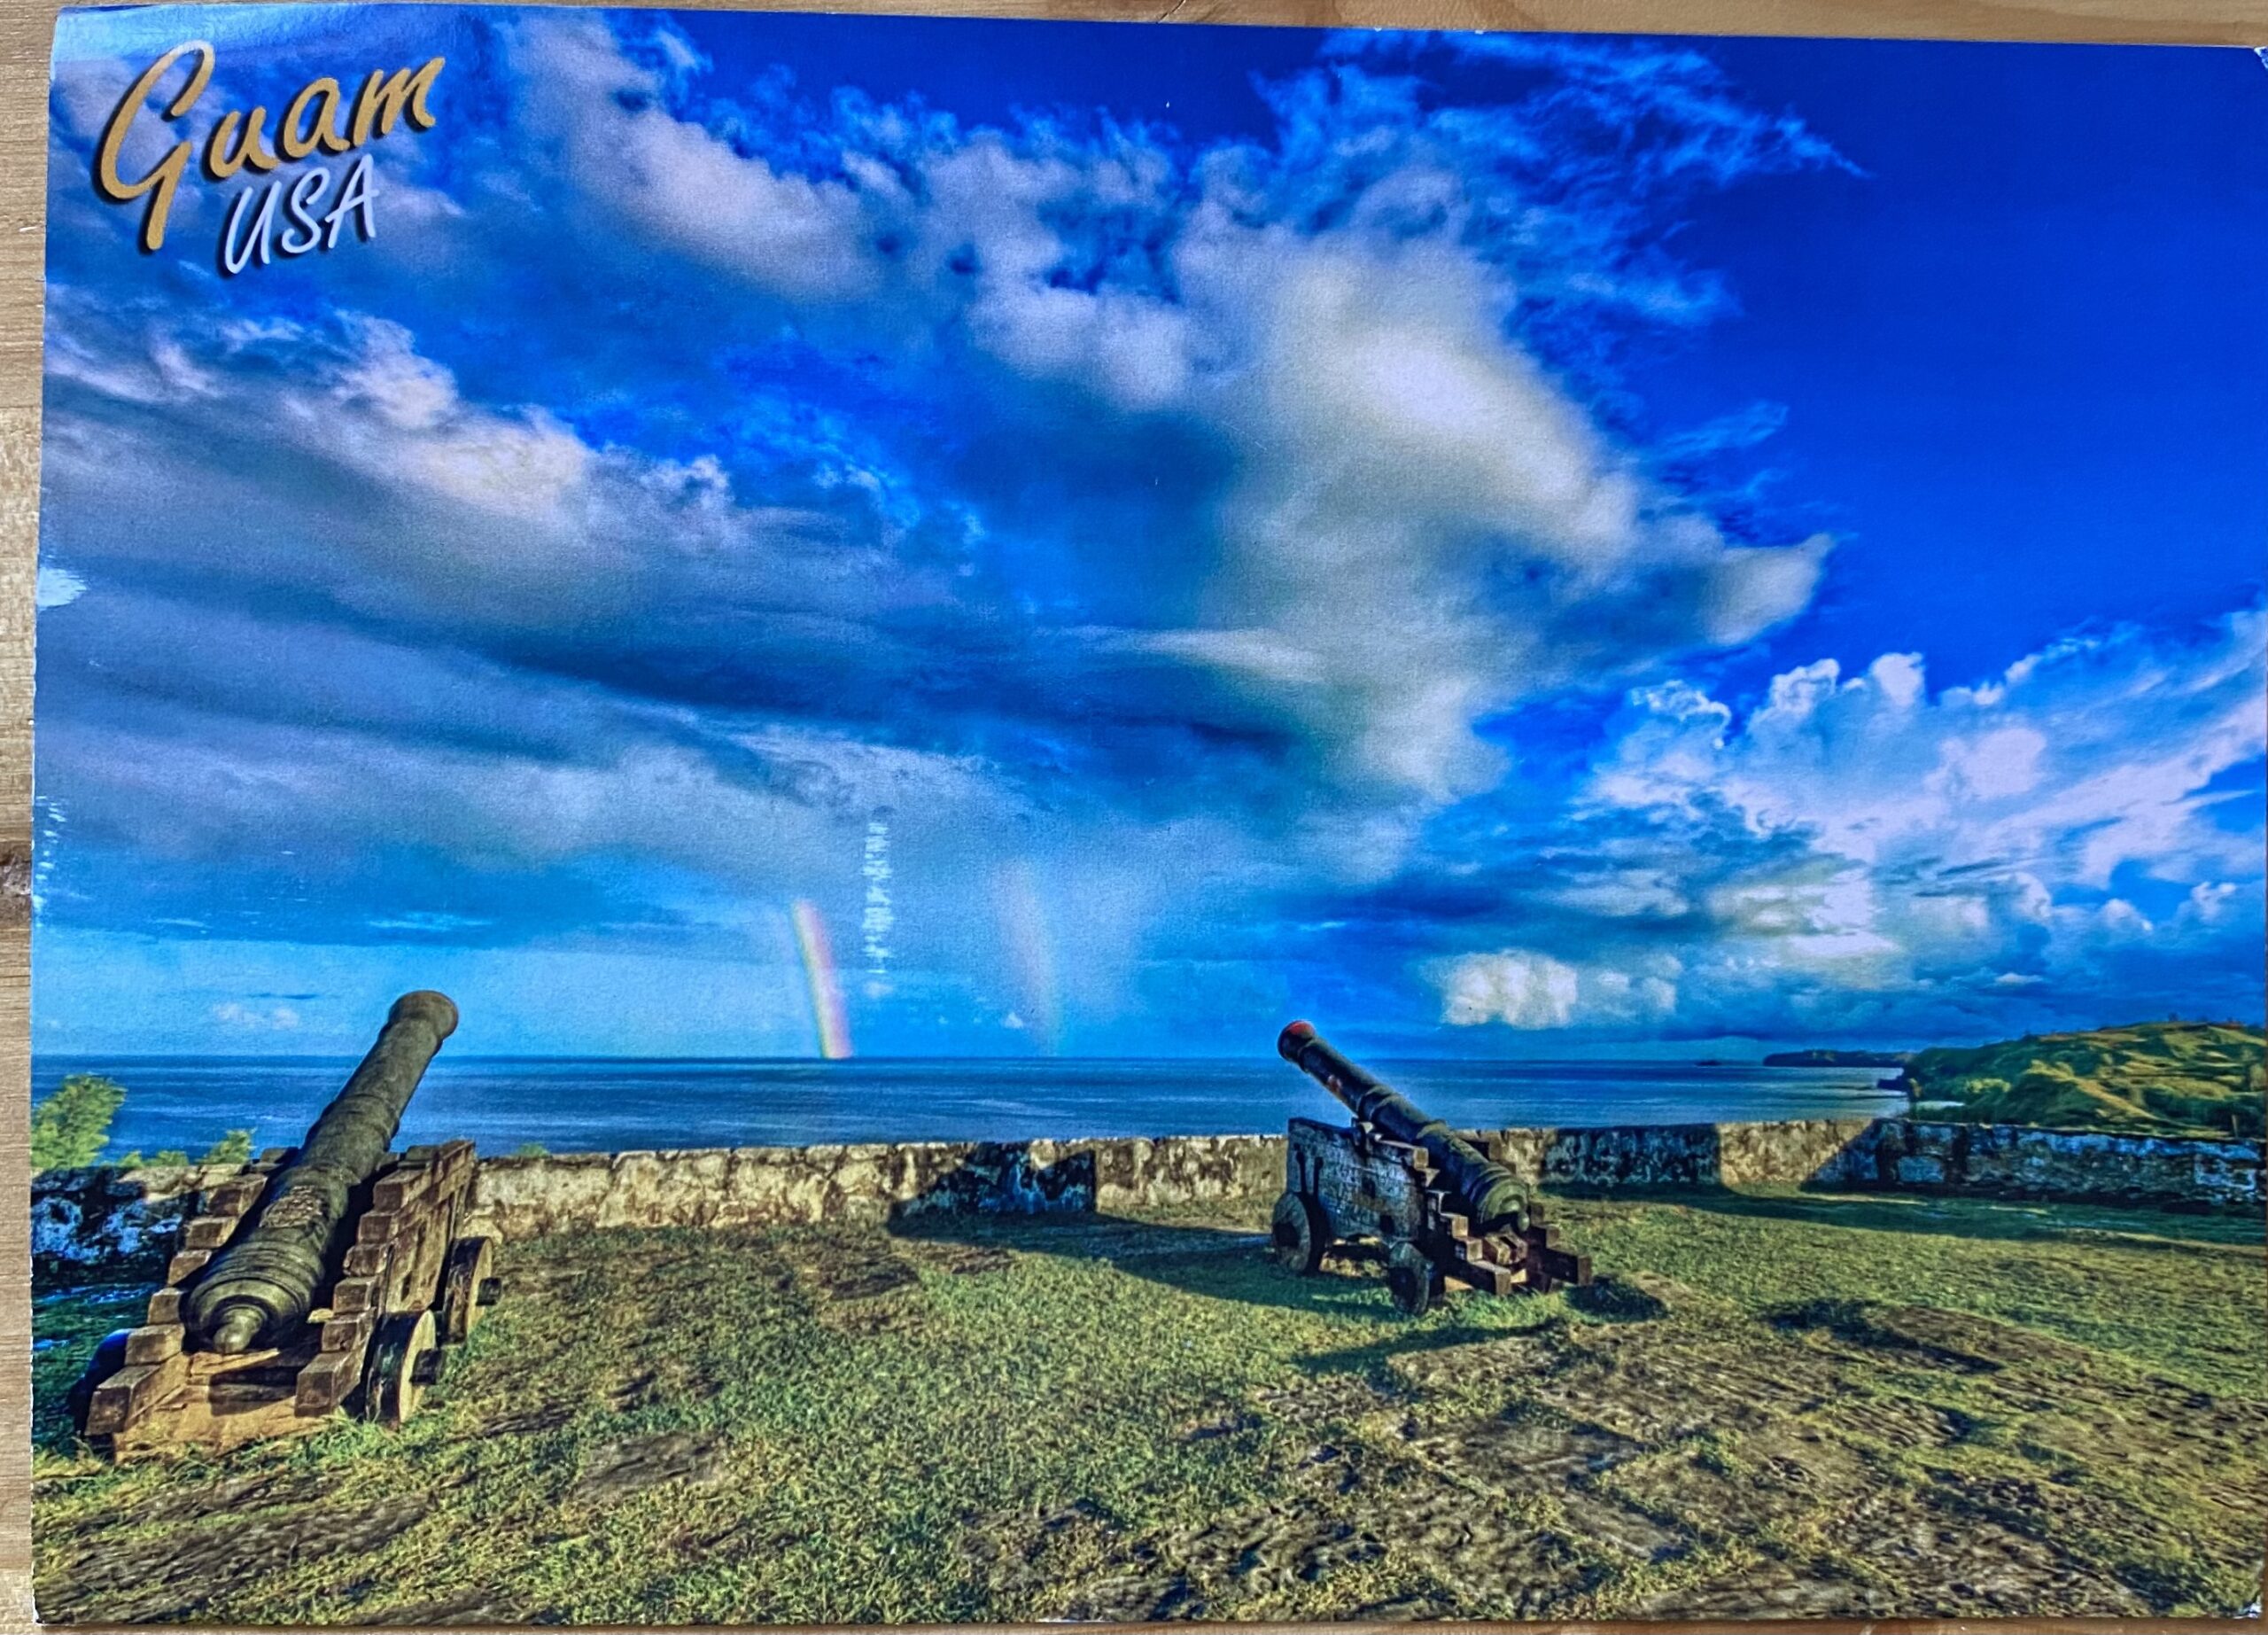 Postcard from Guam, received Aug 16, 2022